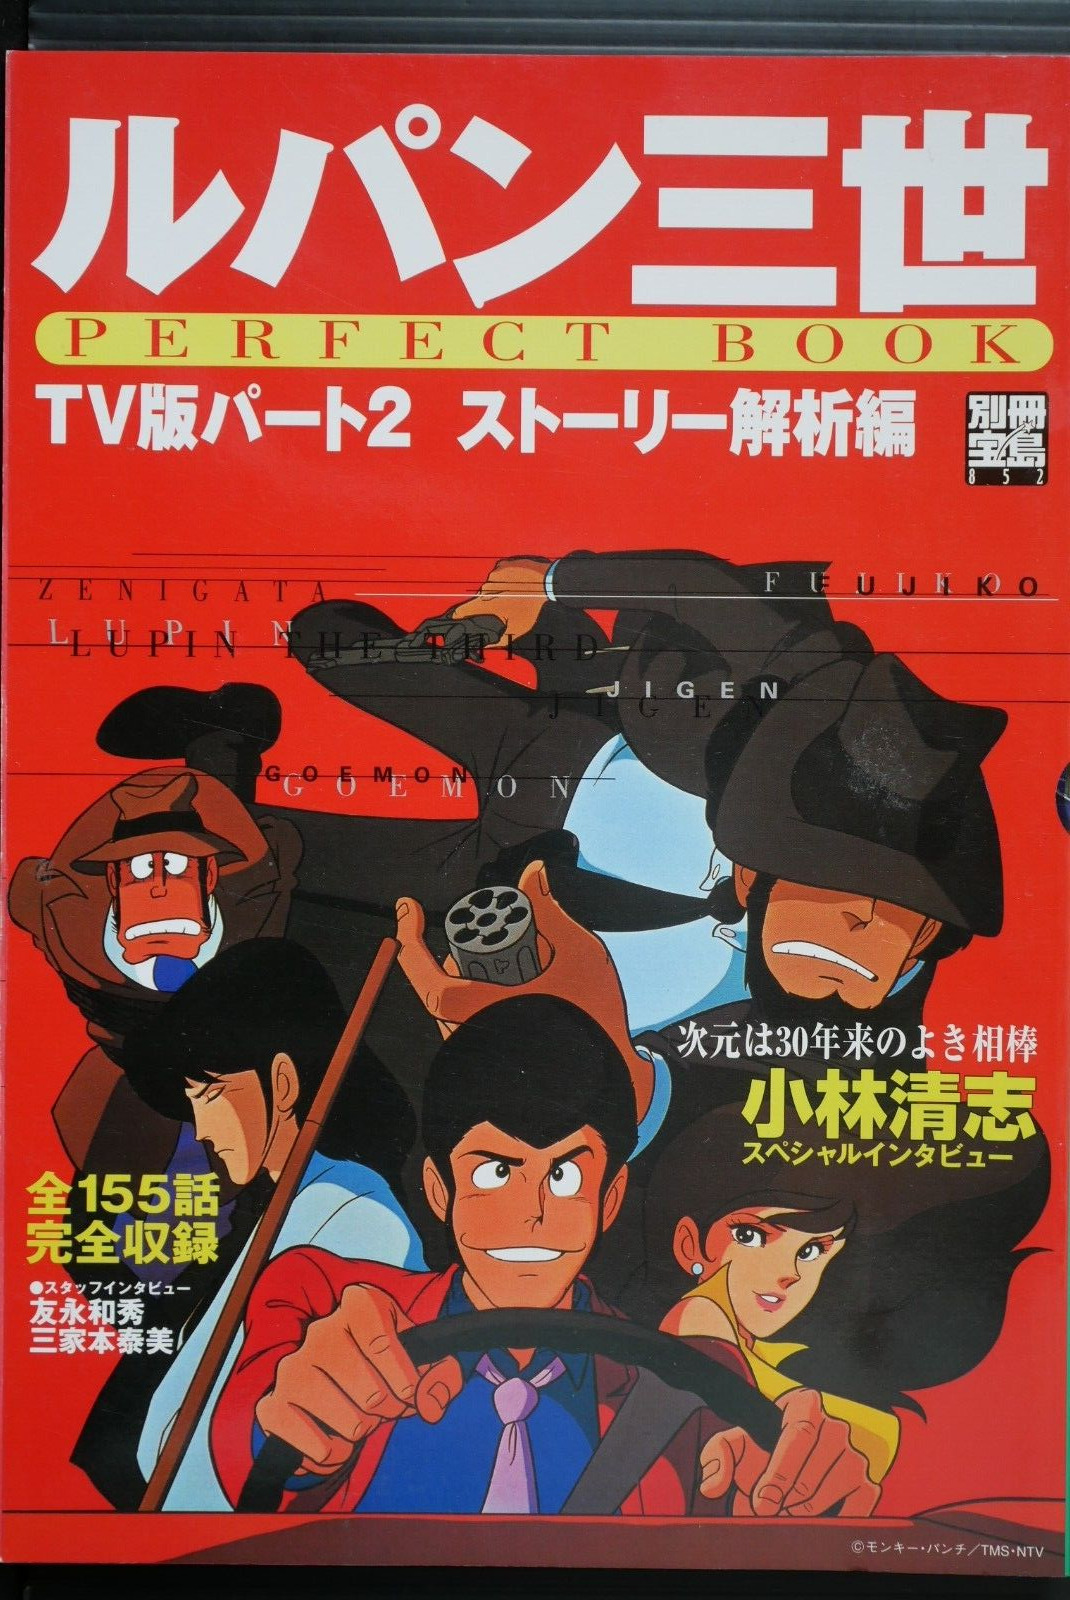 Lupin III / Lupin the Third Perfect Book (Monkey Punch) - JAPAN